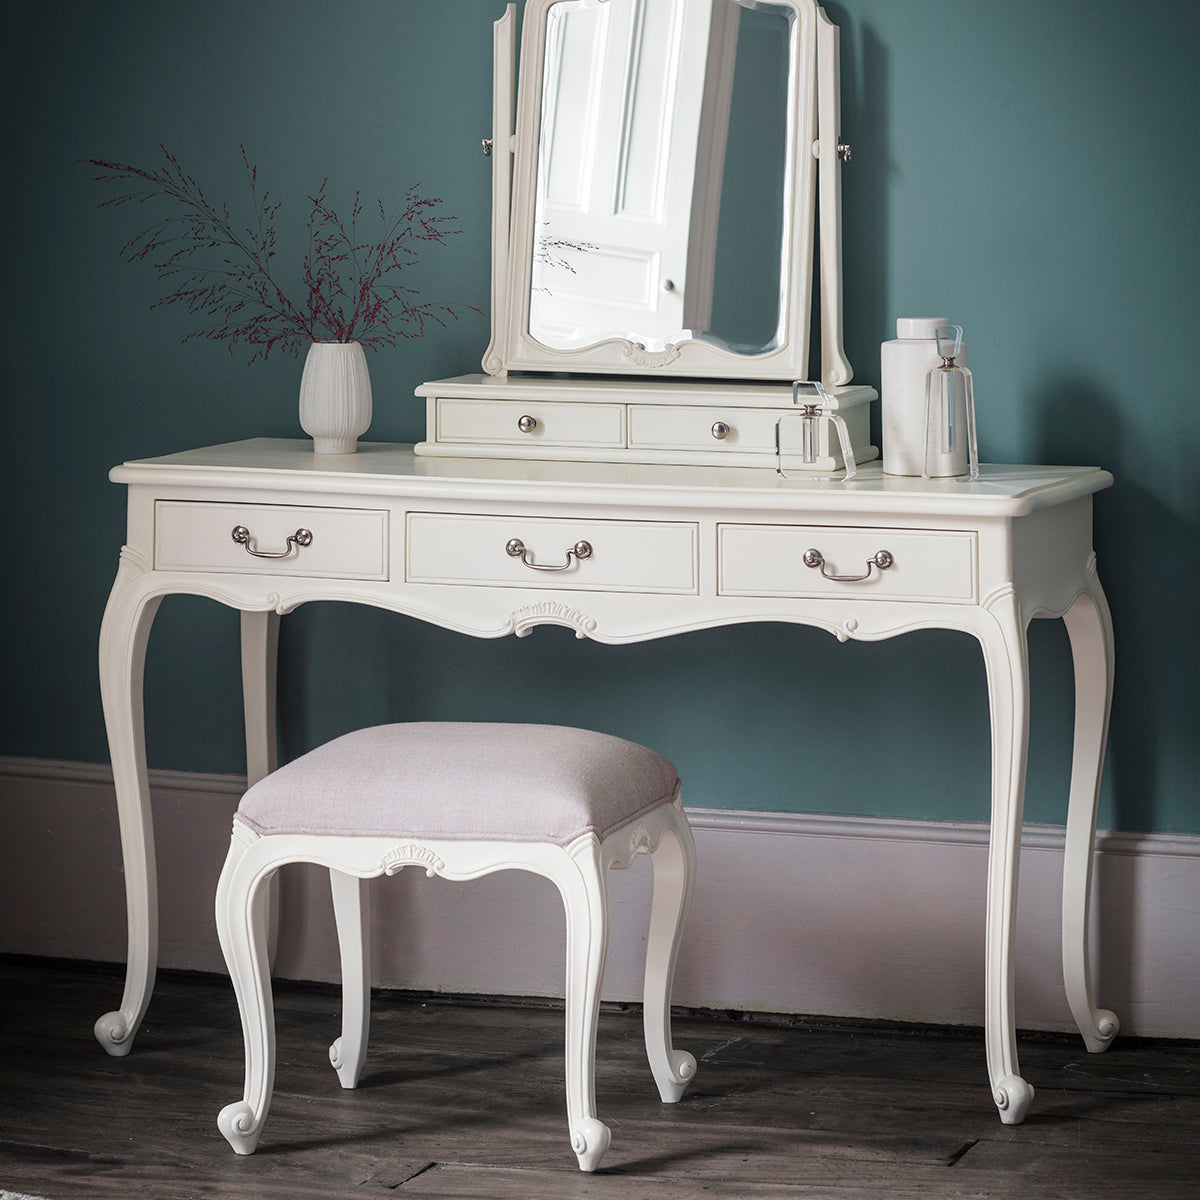 A Holne Dressing Table Vanilla White 1260x450x760mm with a mirror and stool for interior decor or home furniture from Kikiathome.co.uk.